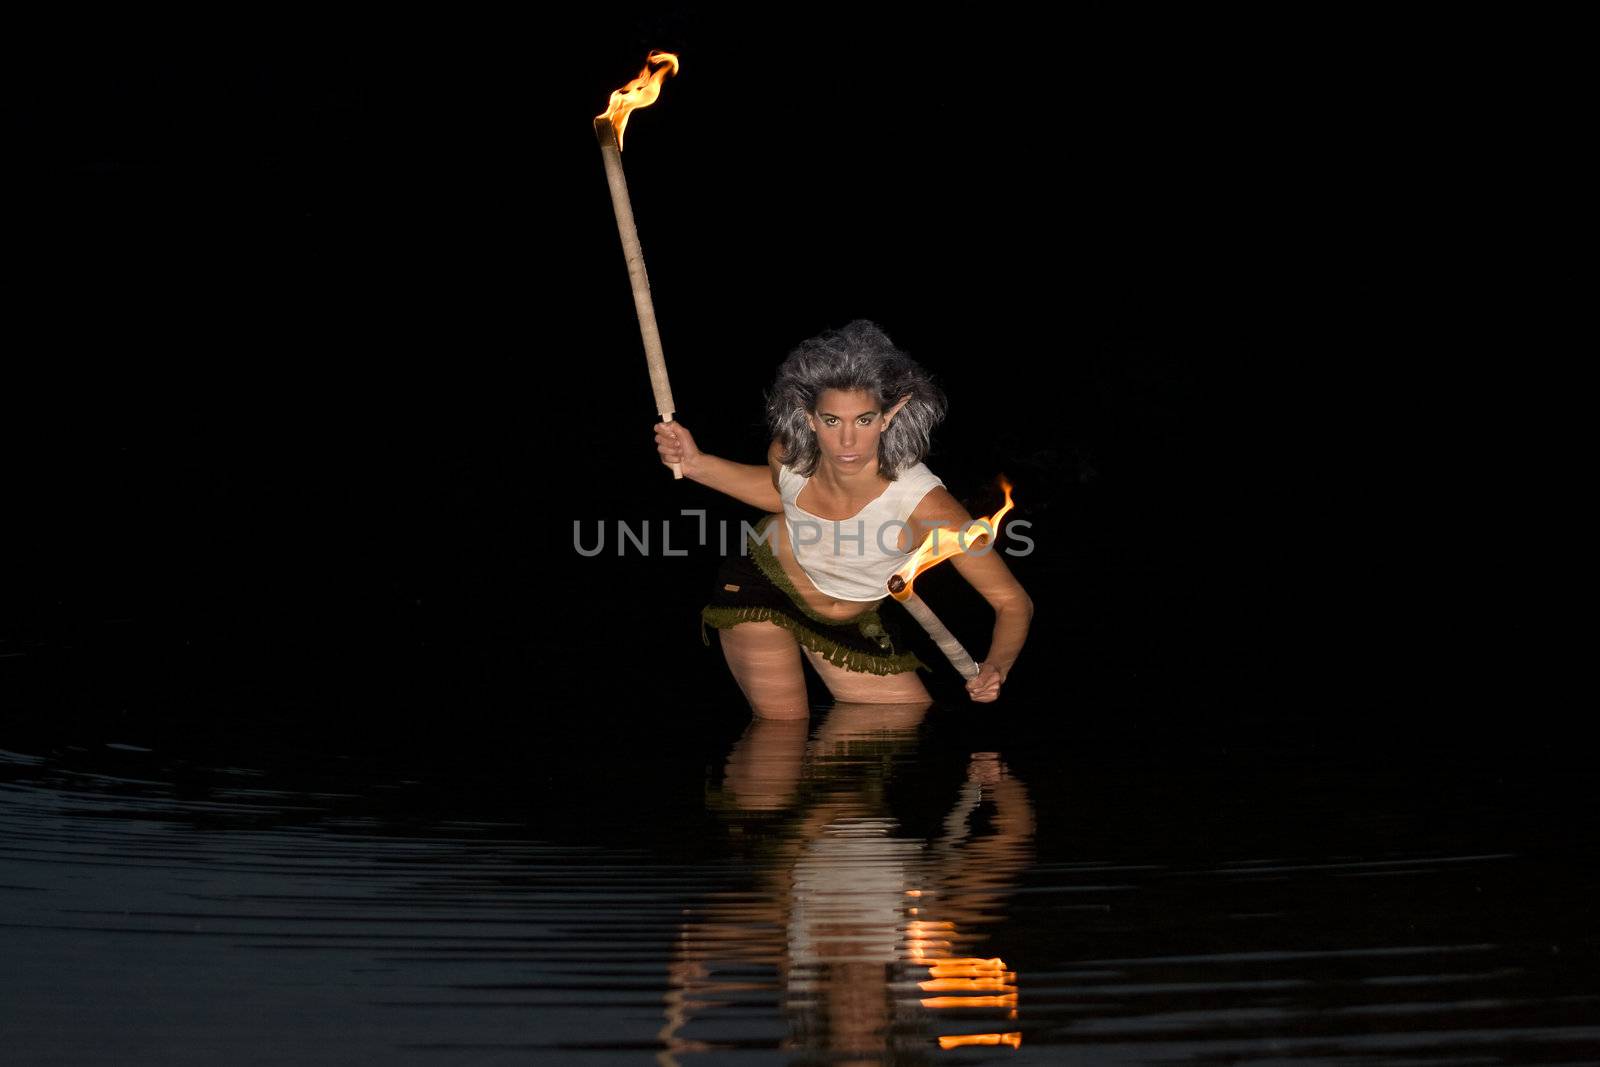 Elf with torches in the water is